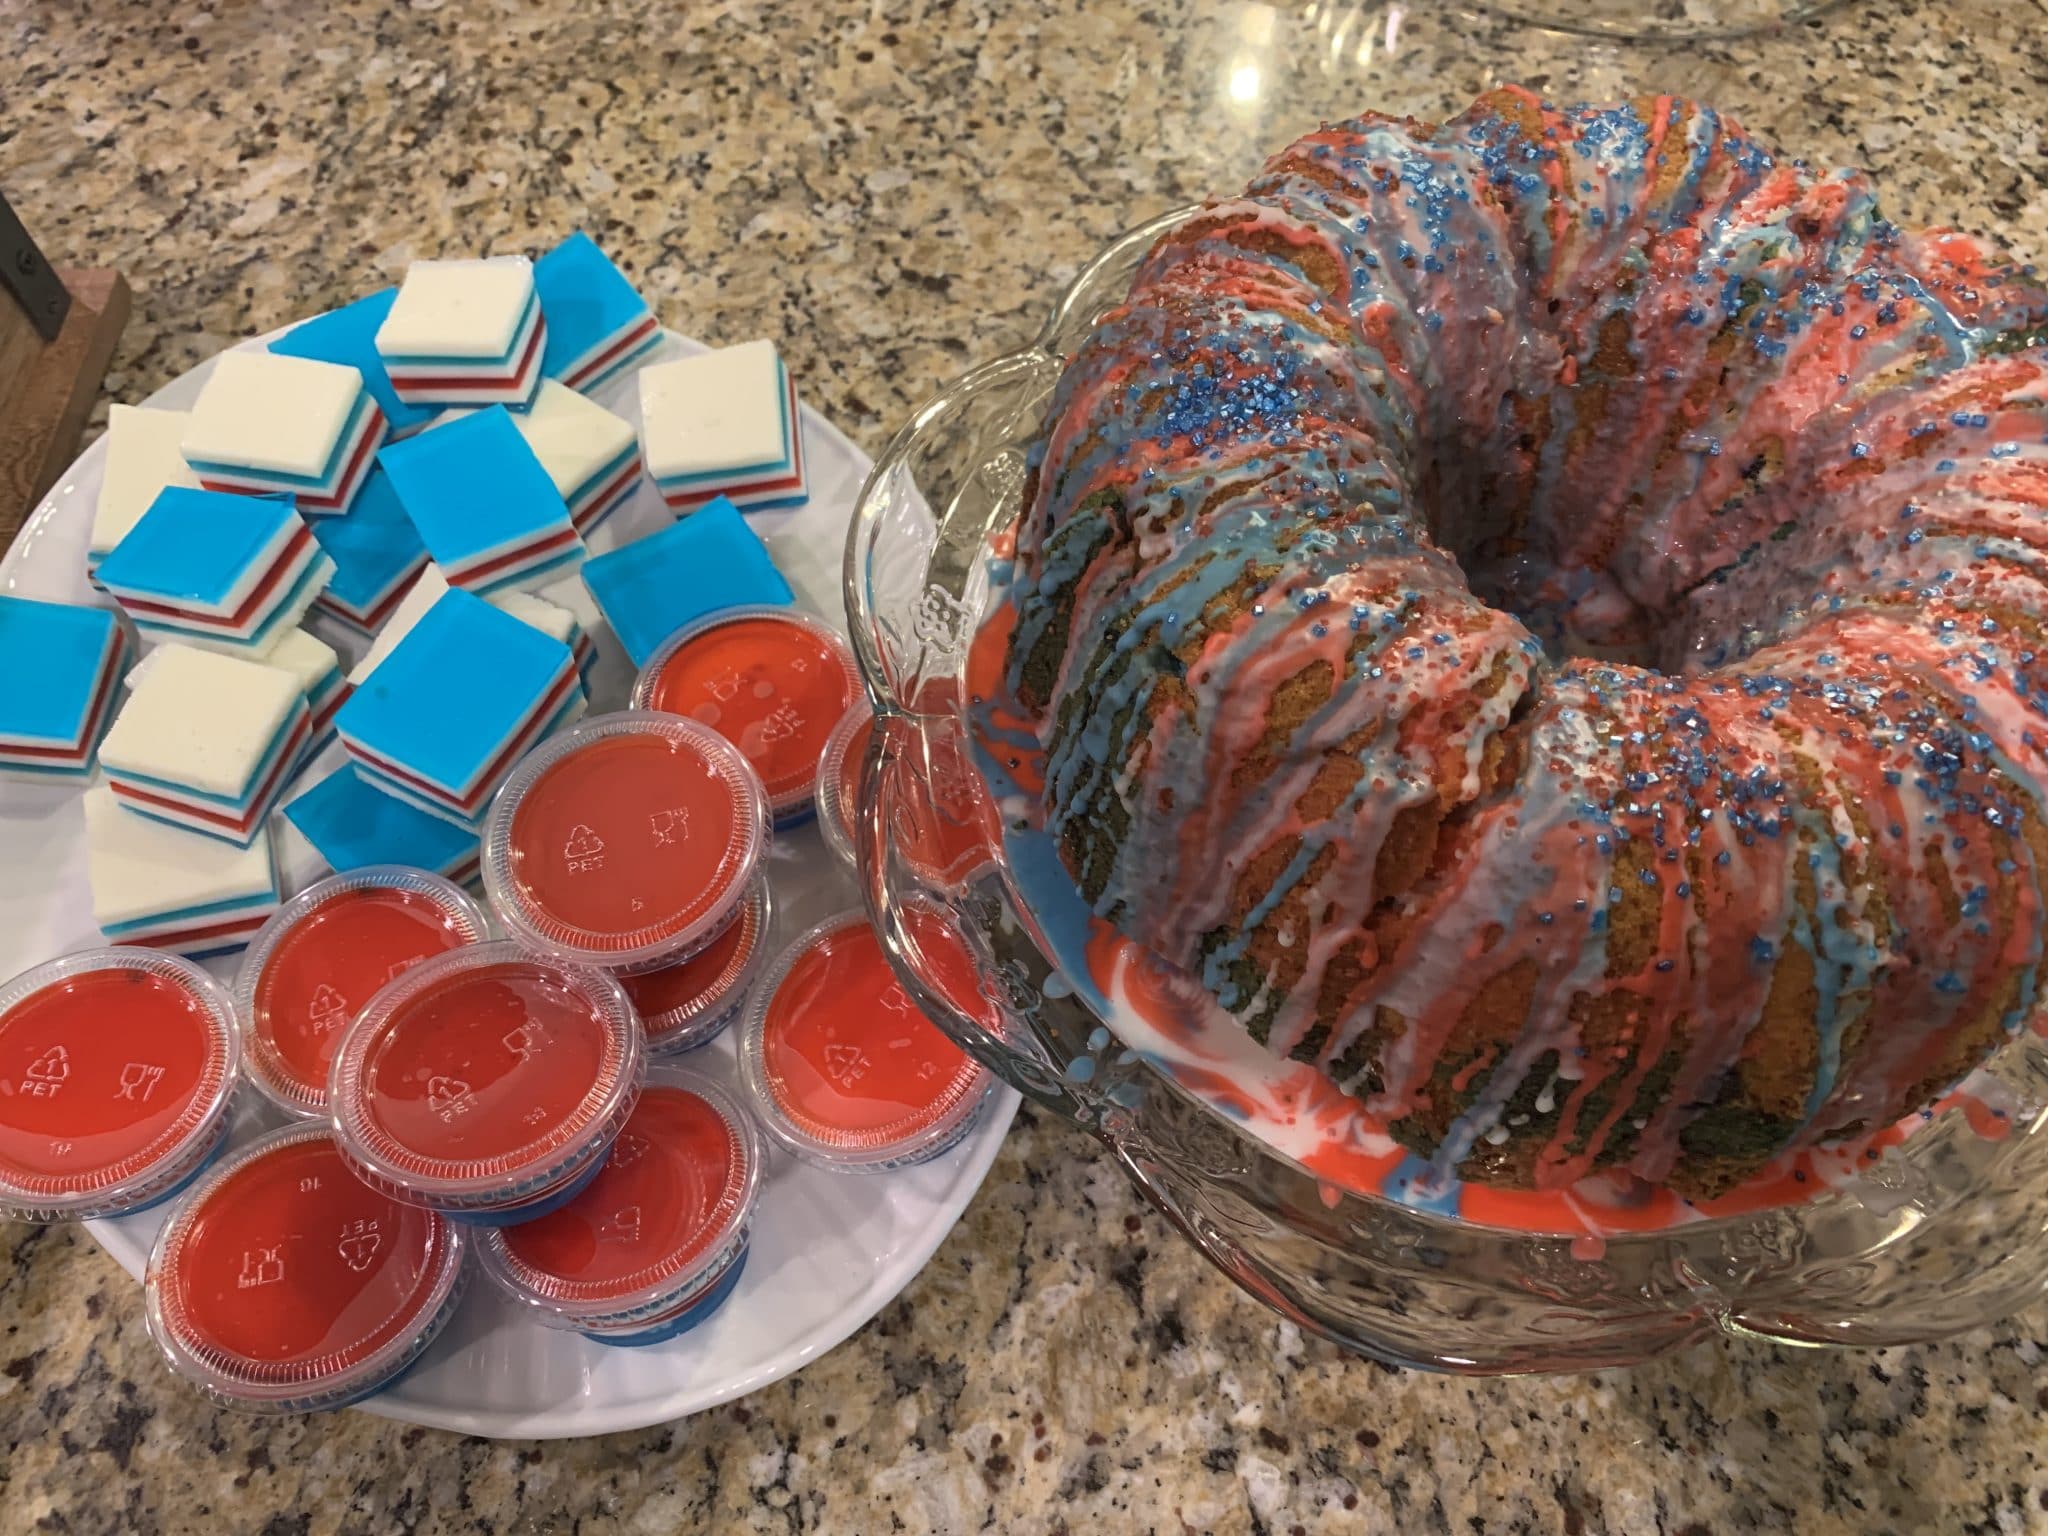 uly 4th Food, Stilettos and Diapers, Layered Jello, Patriotic Jello shots, red, white and blue bundt cake